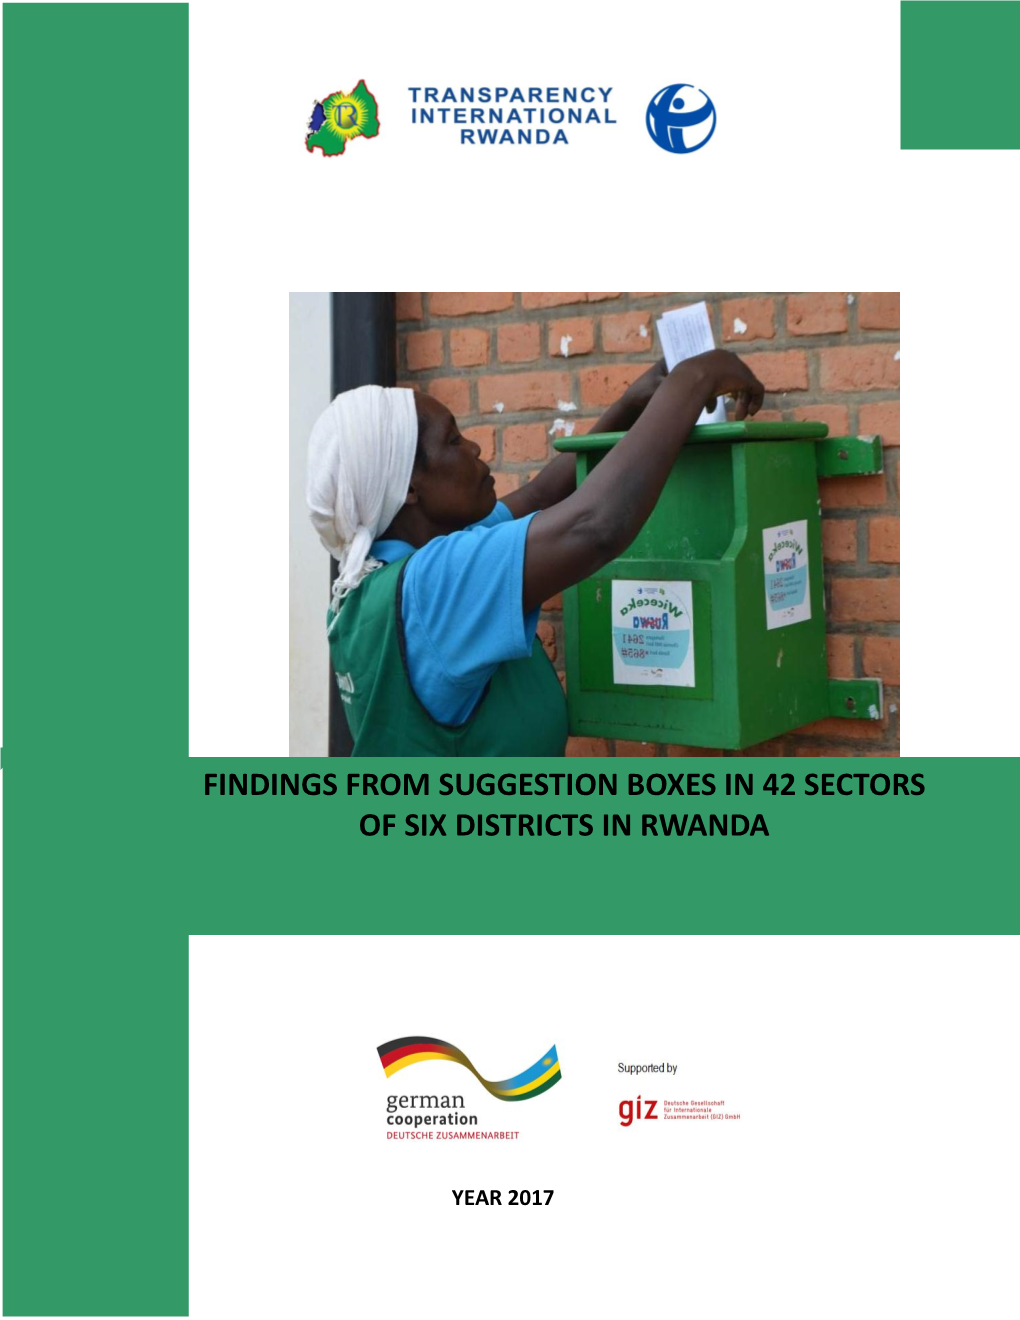 Findings from Suggestion Boxes in 42 Sectors of Six Districts in Rwanda